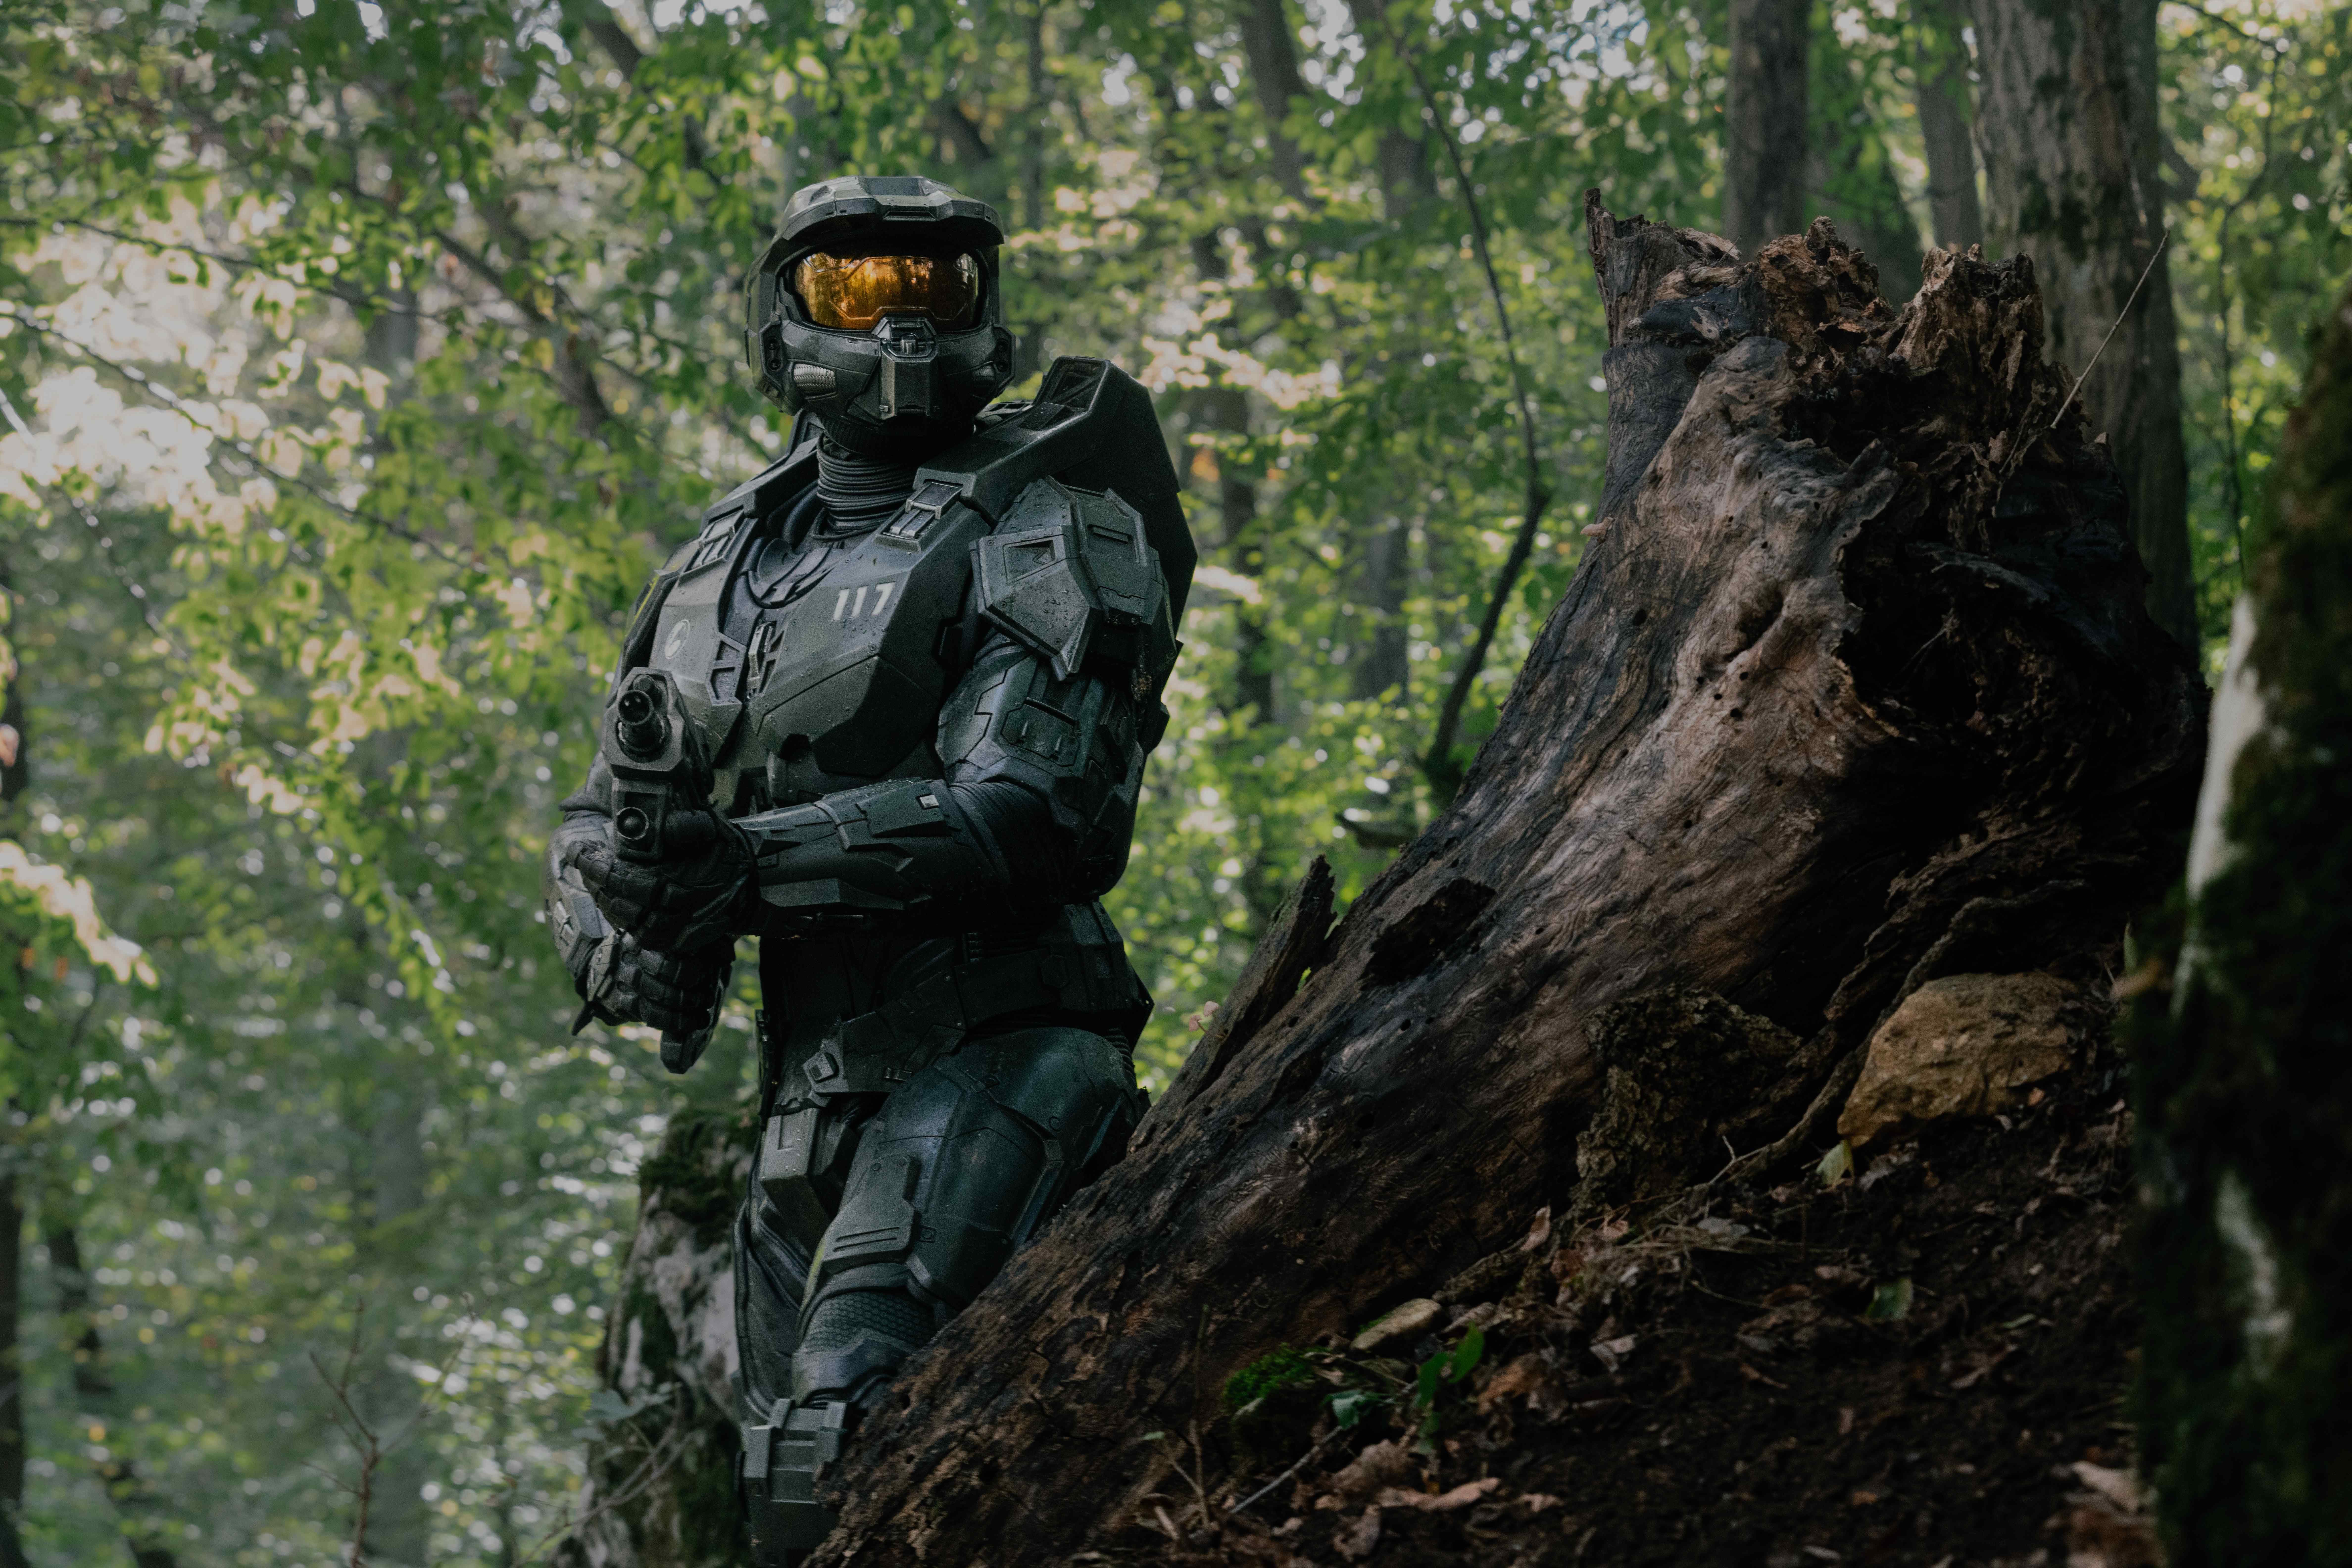 'Halo' Season 2: Pablo Schreiber Lays The 'Helmet On Or Off' Controversy To Rest